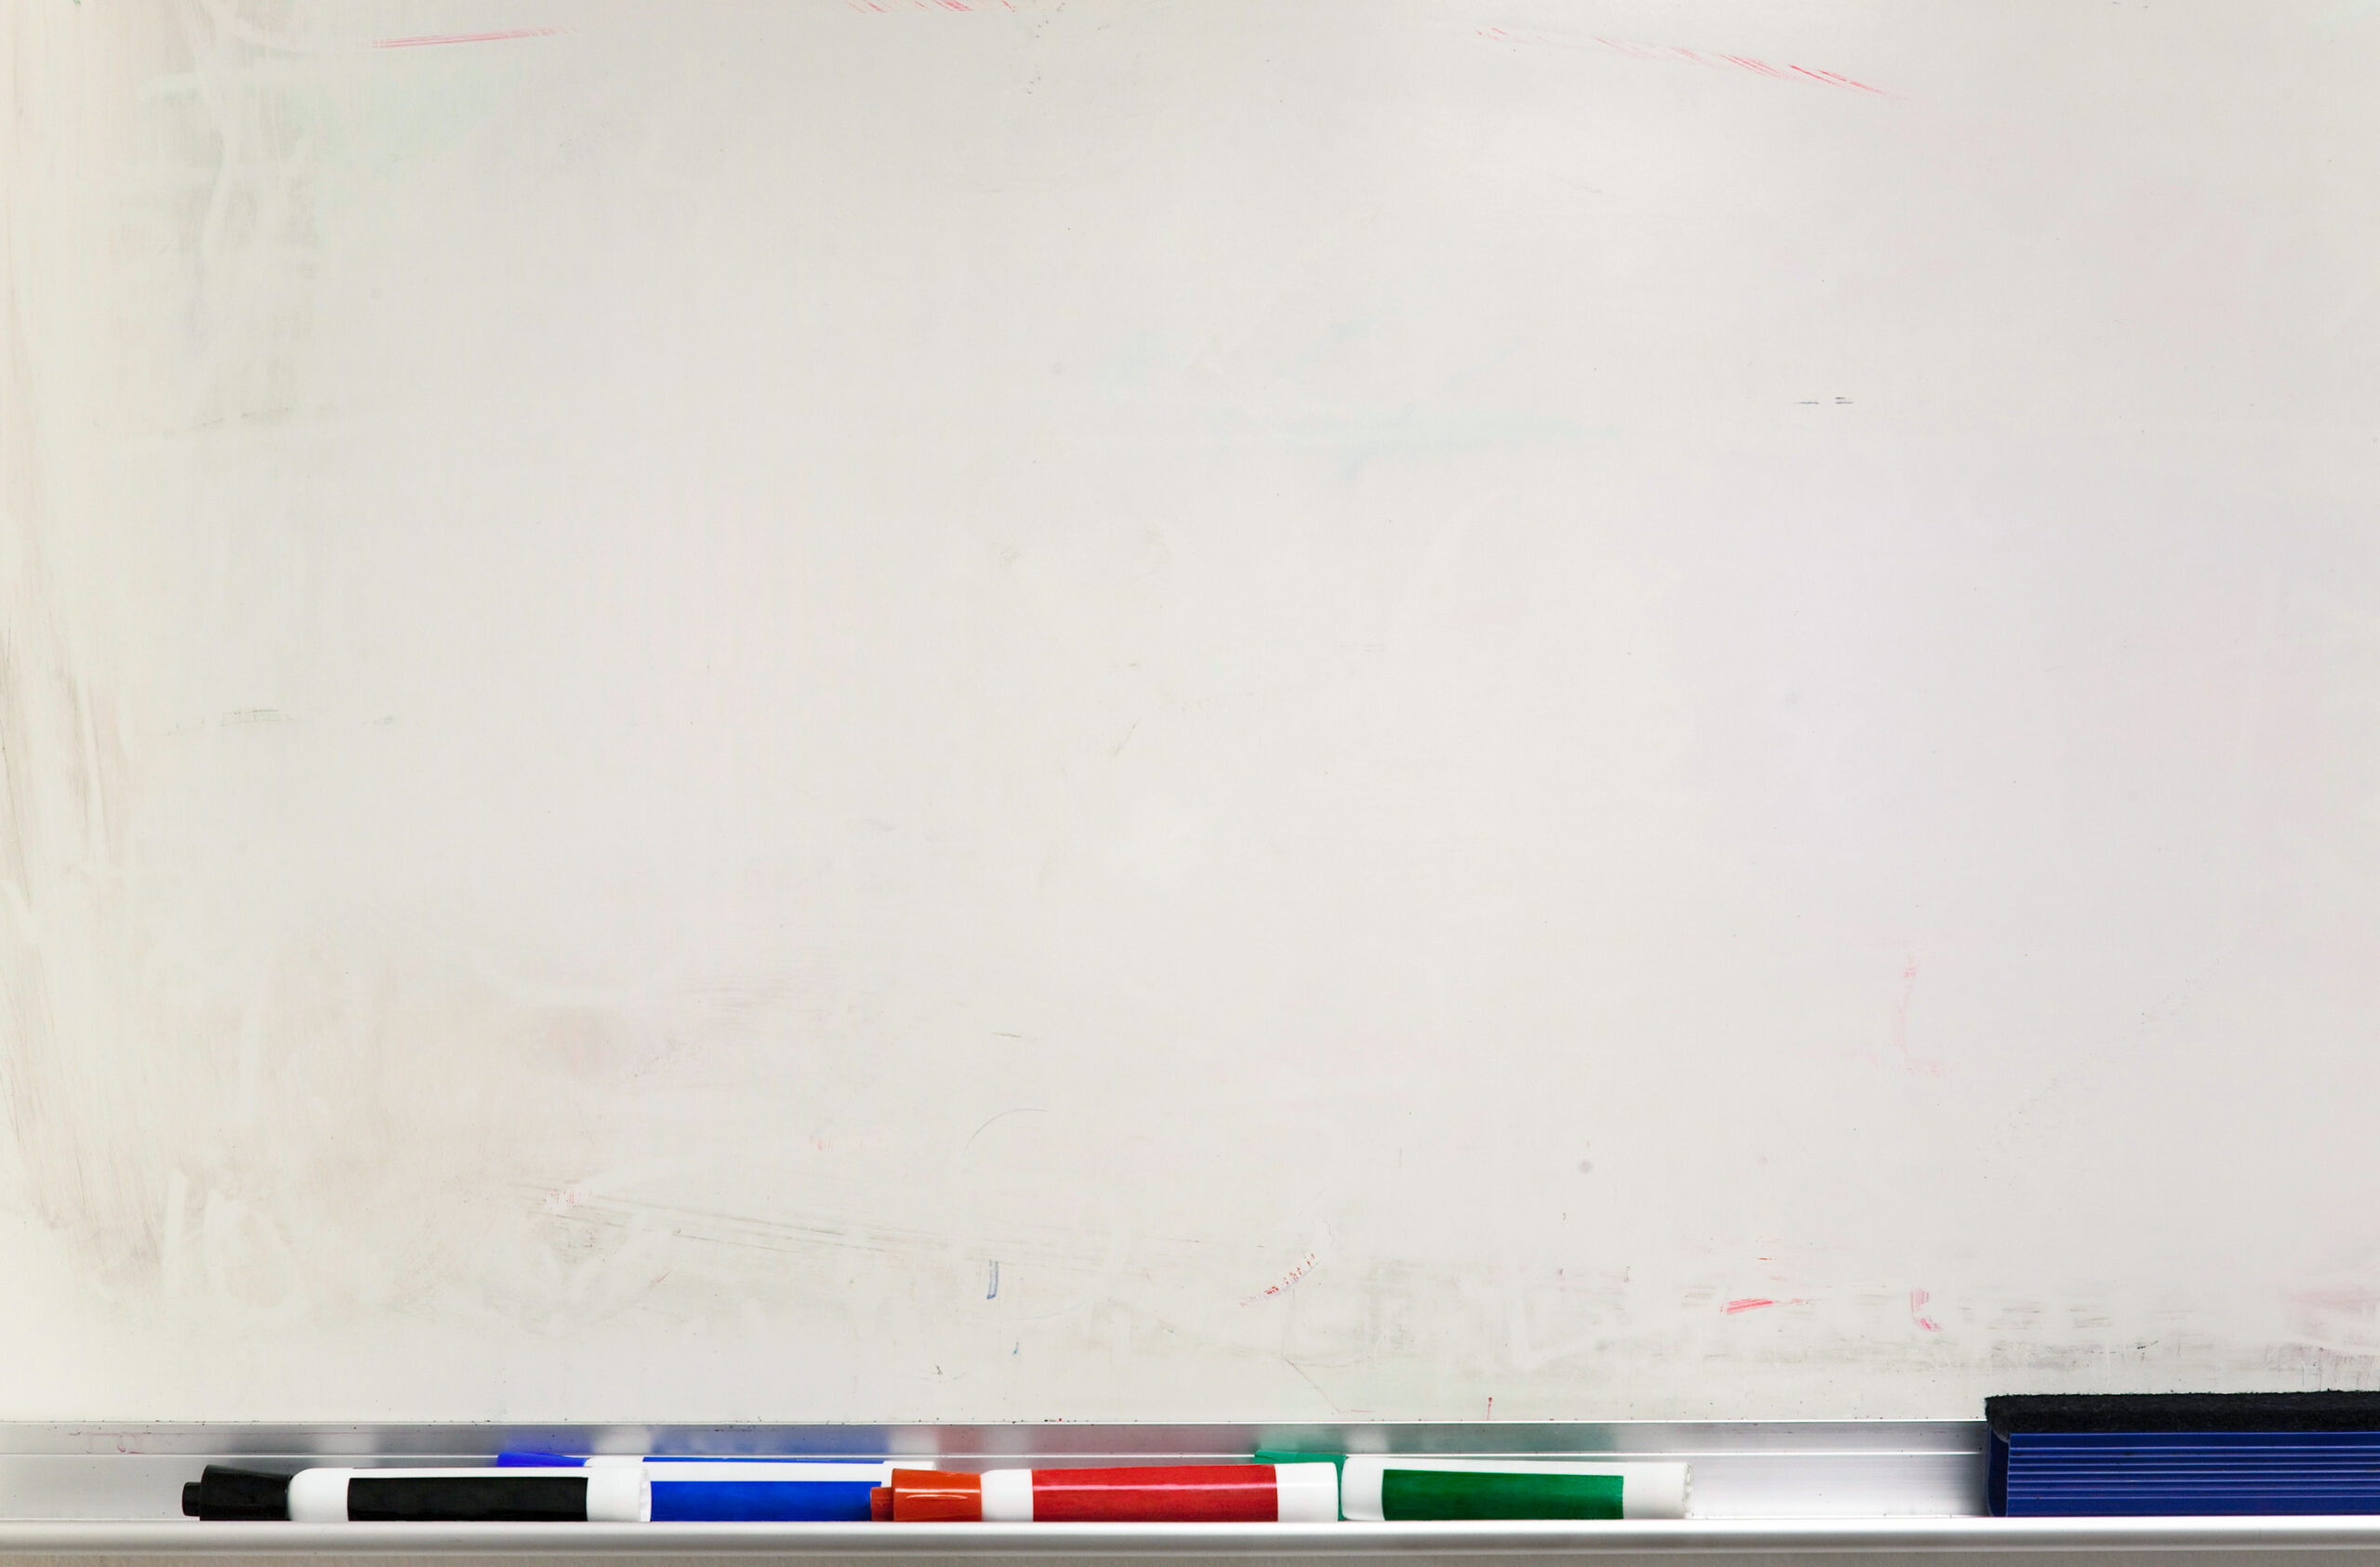 An old empty whiteboard with markers and eraser